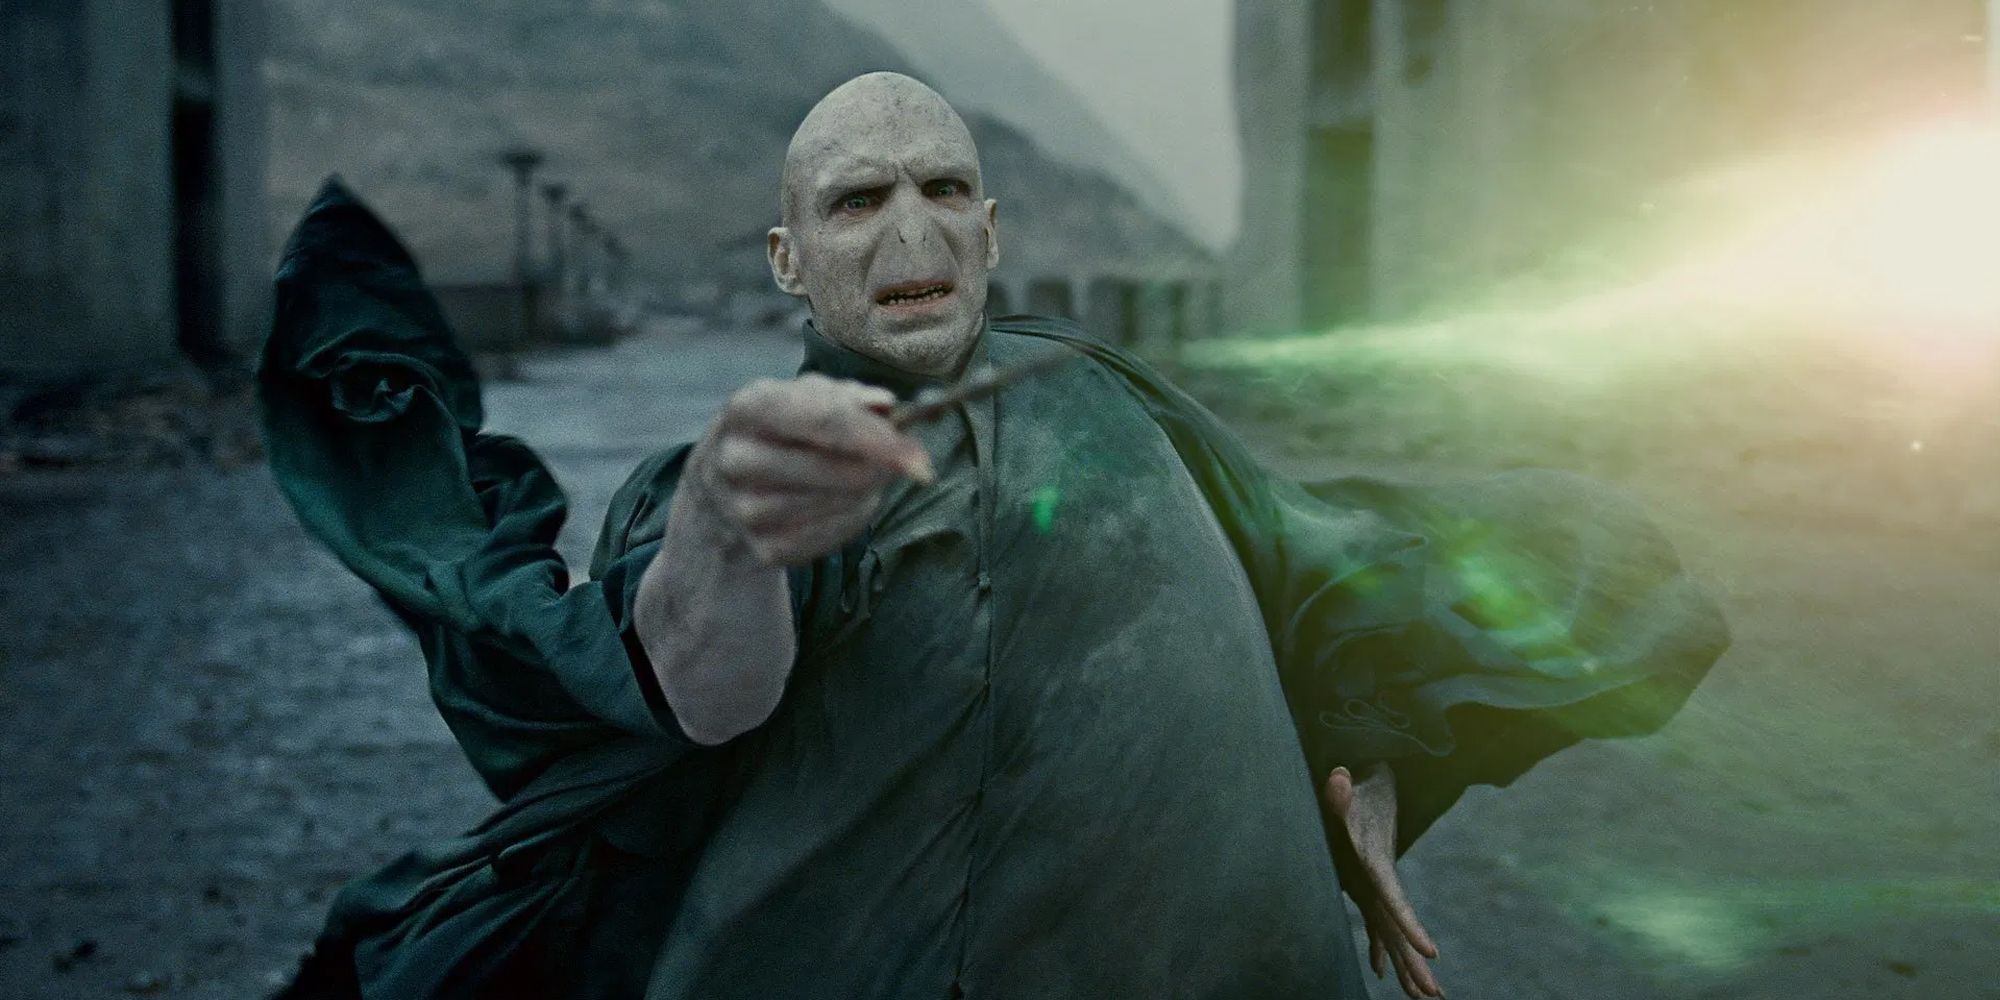 Voldemort squares off with Harry in Harry Potter and the Deathly Hallows Part 2